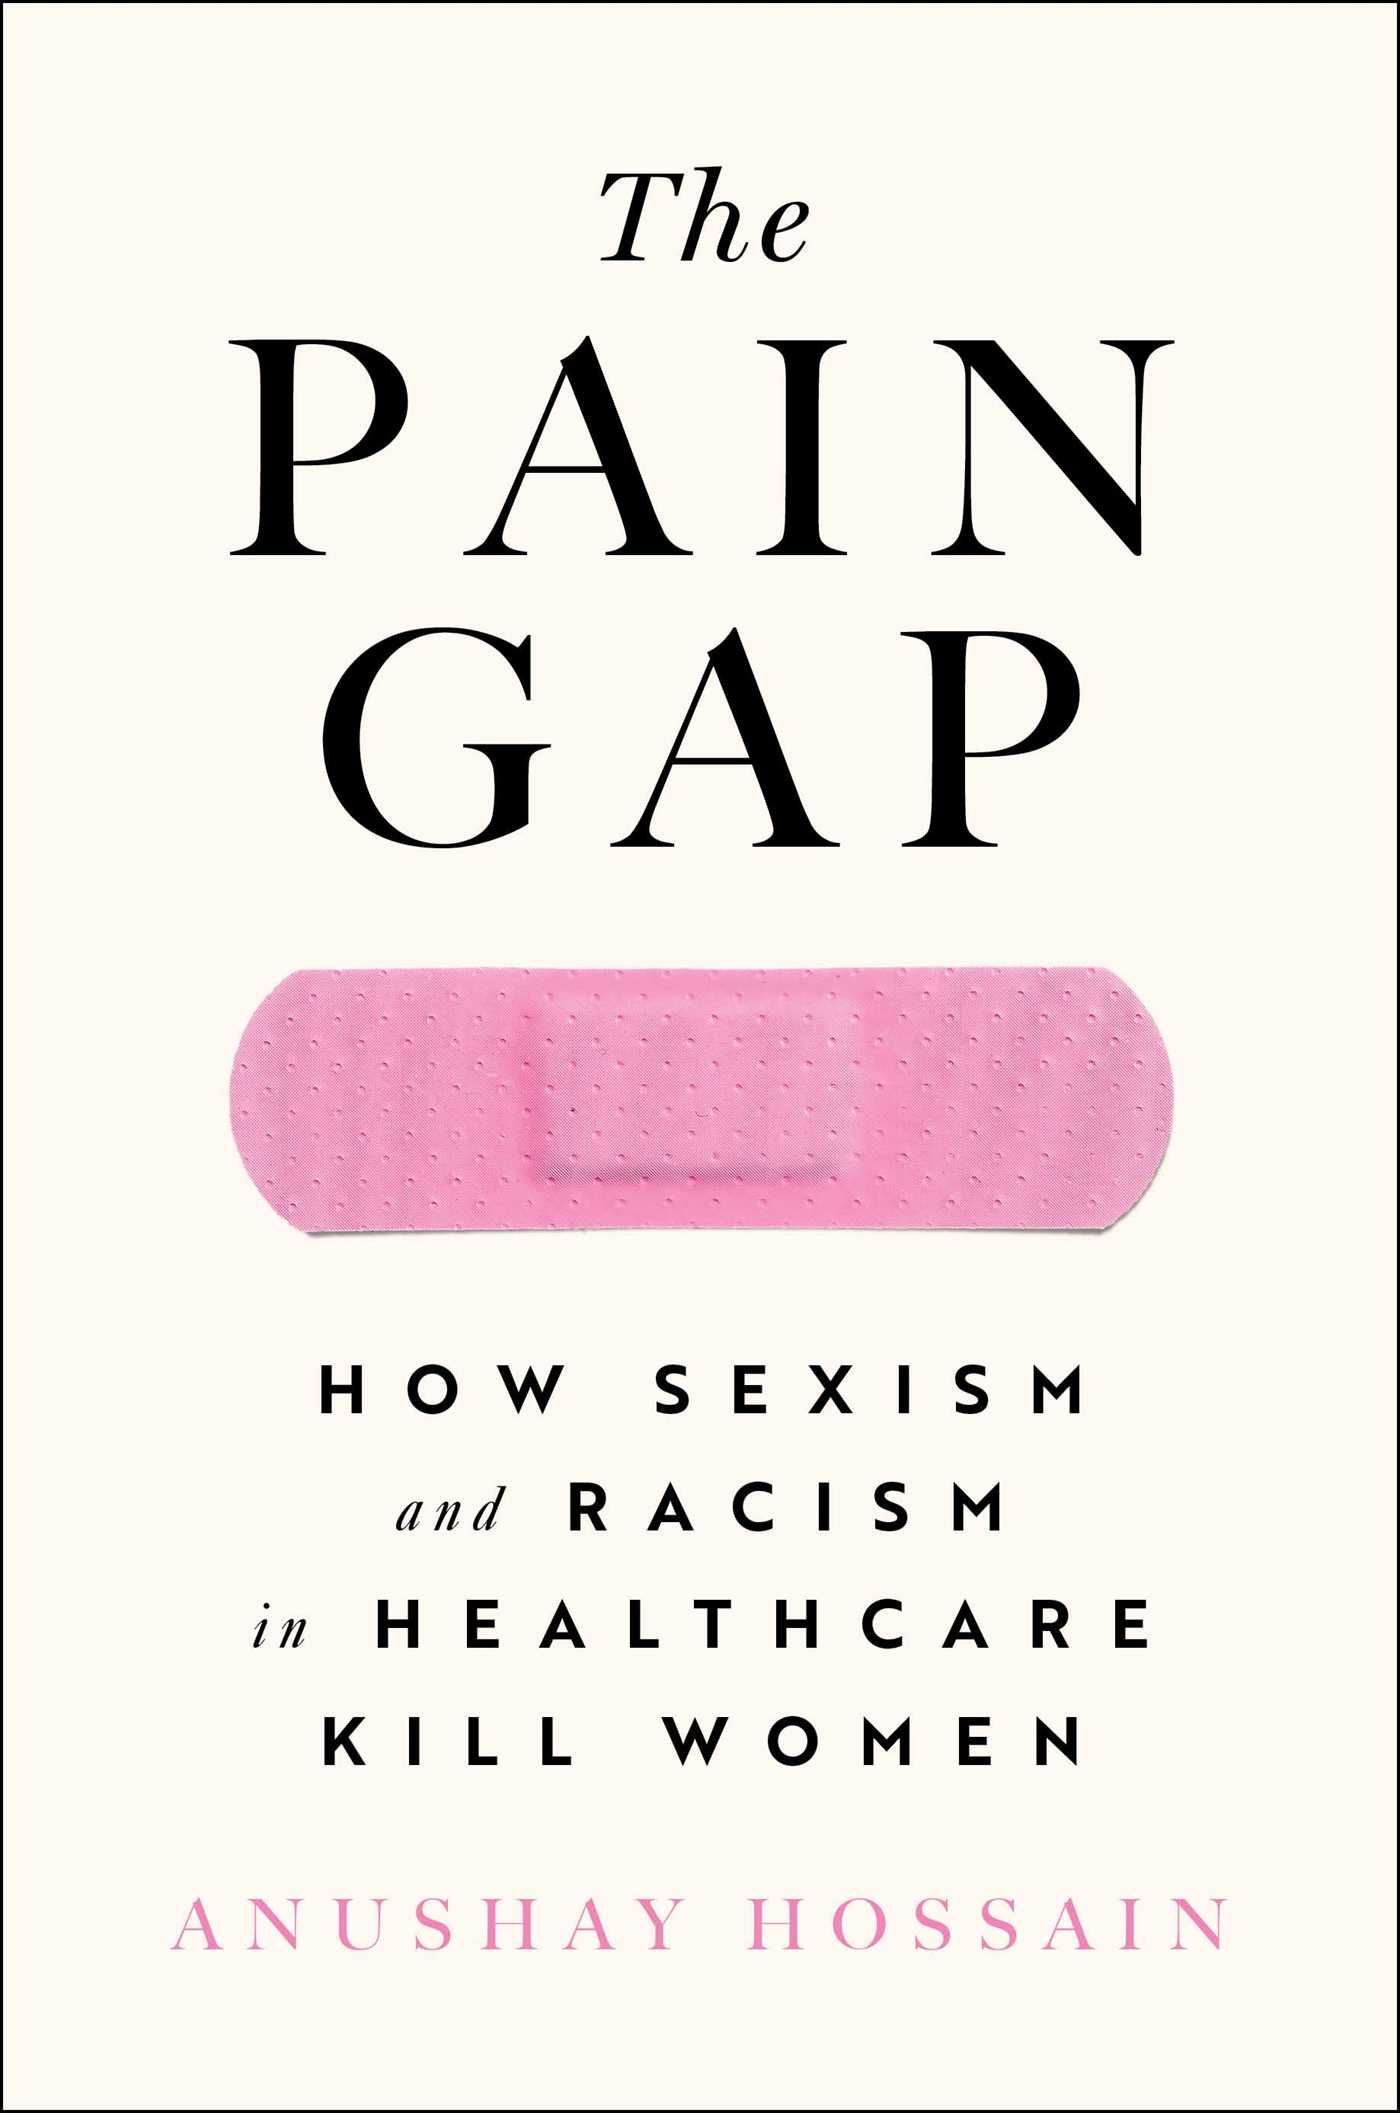 The Pain Gap by Anushay Hossain book cover